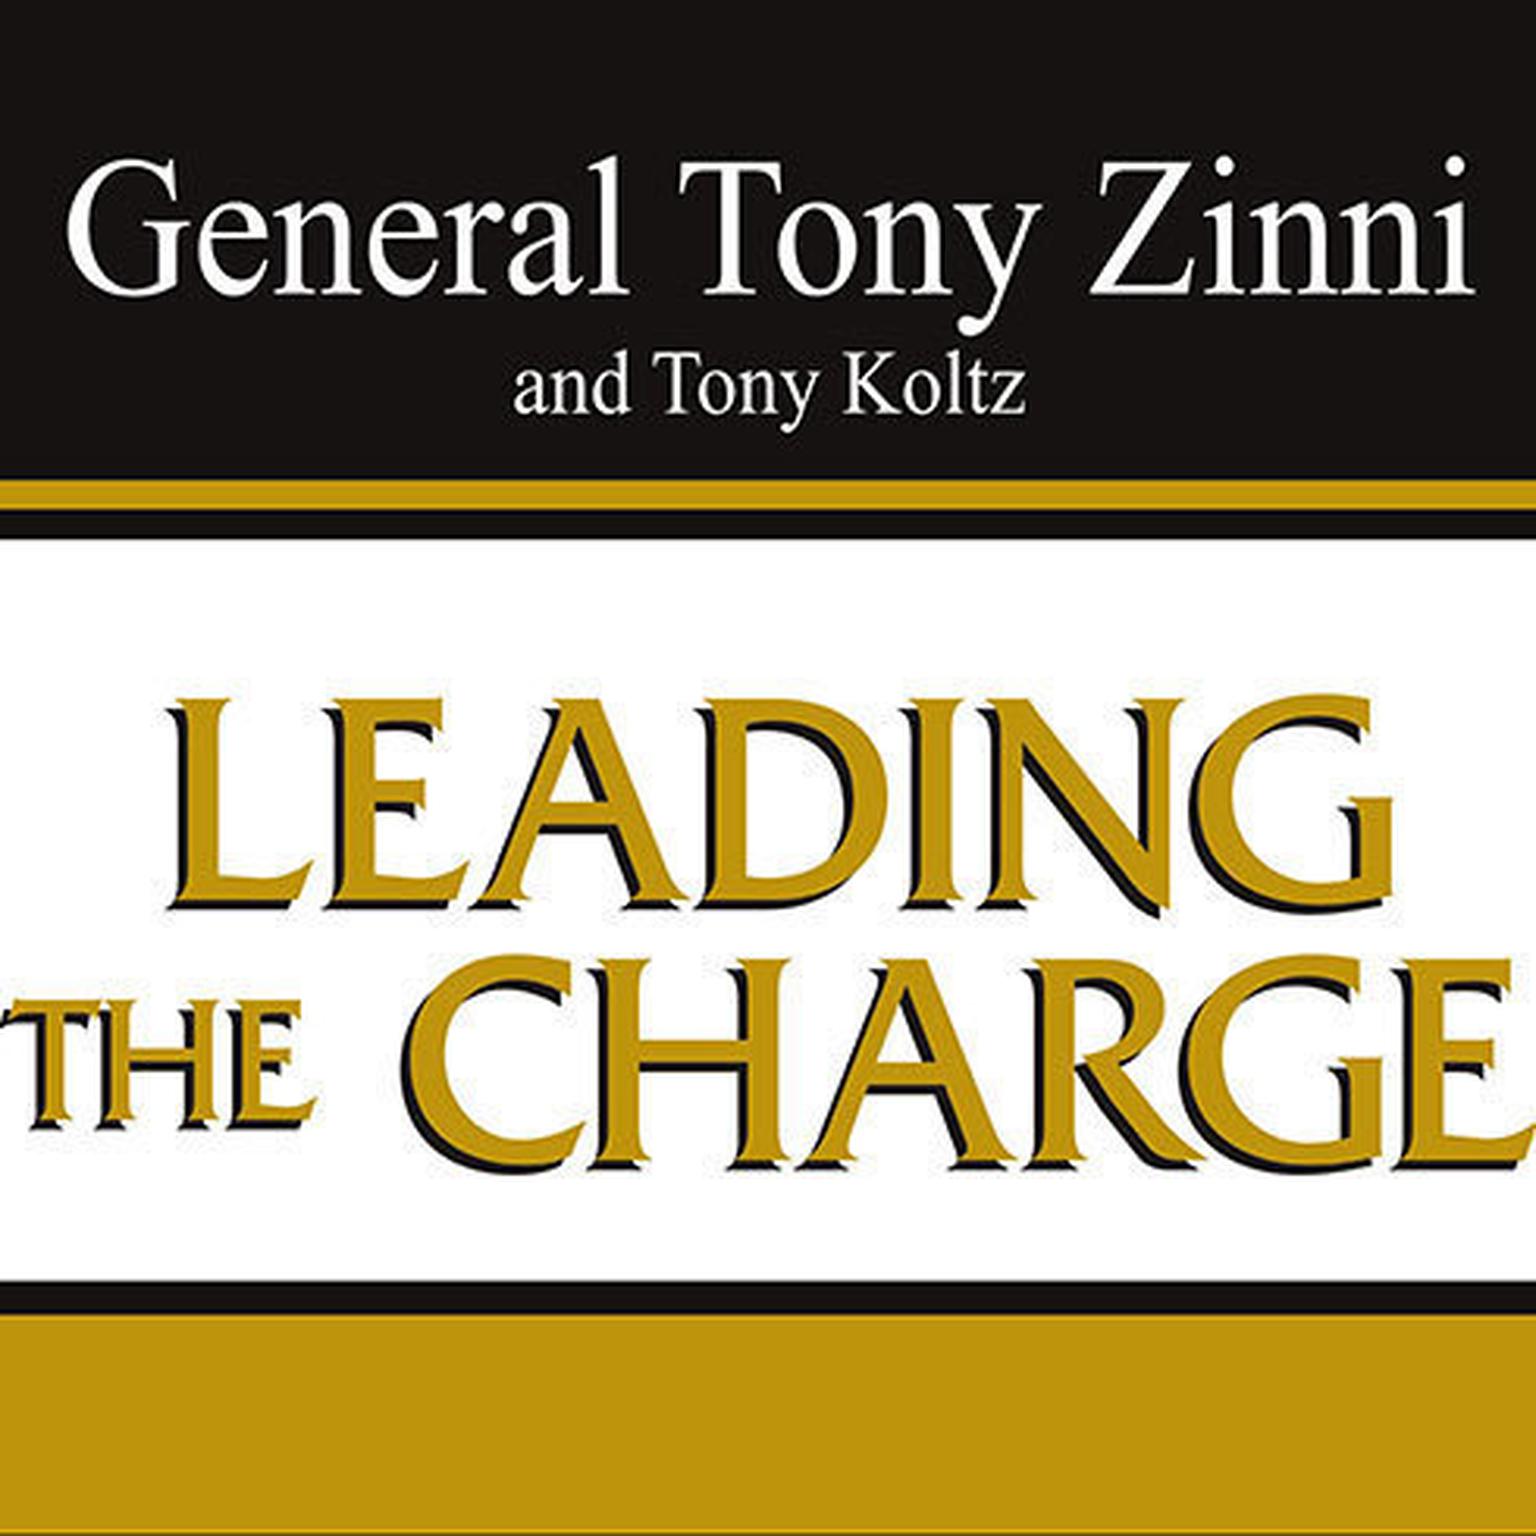 Leading the Charge: Leadership Lessons from the Battlefield to the Boardroom Audiobook, by Tony Zinni